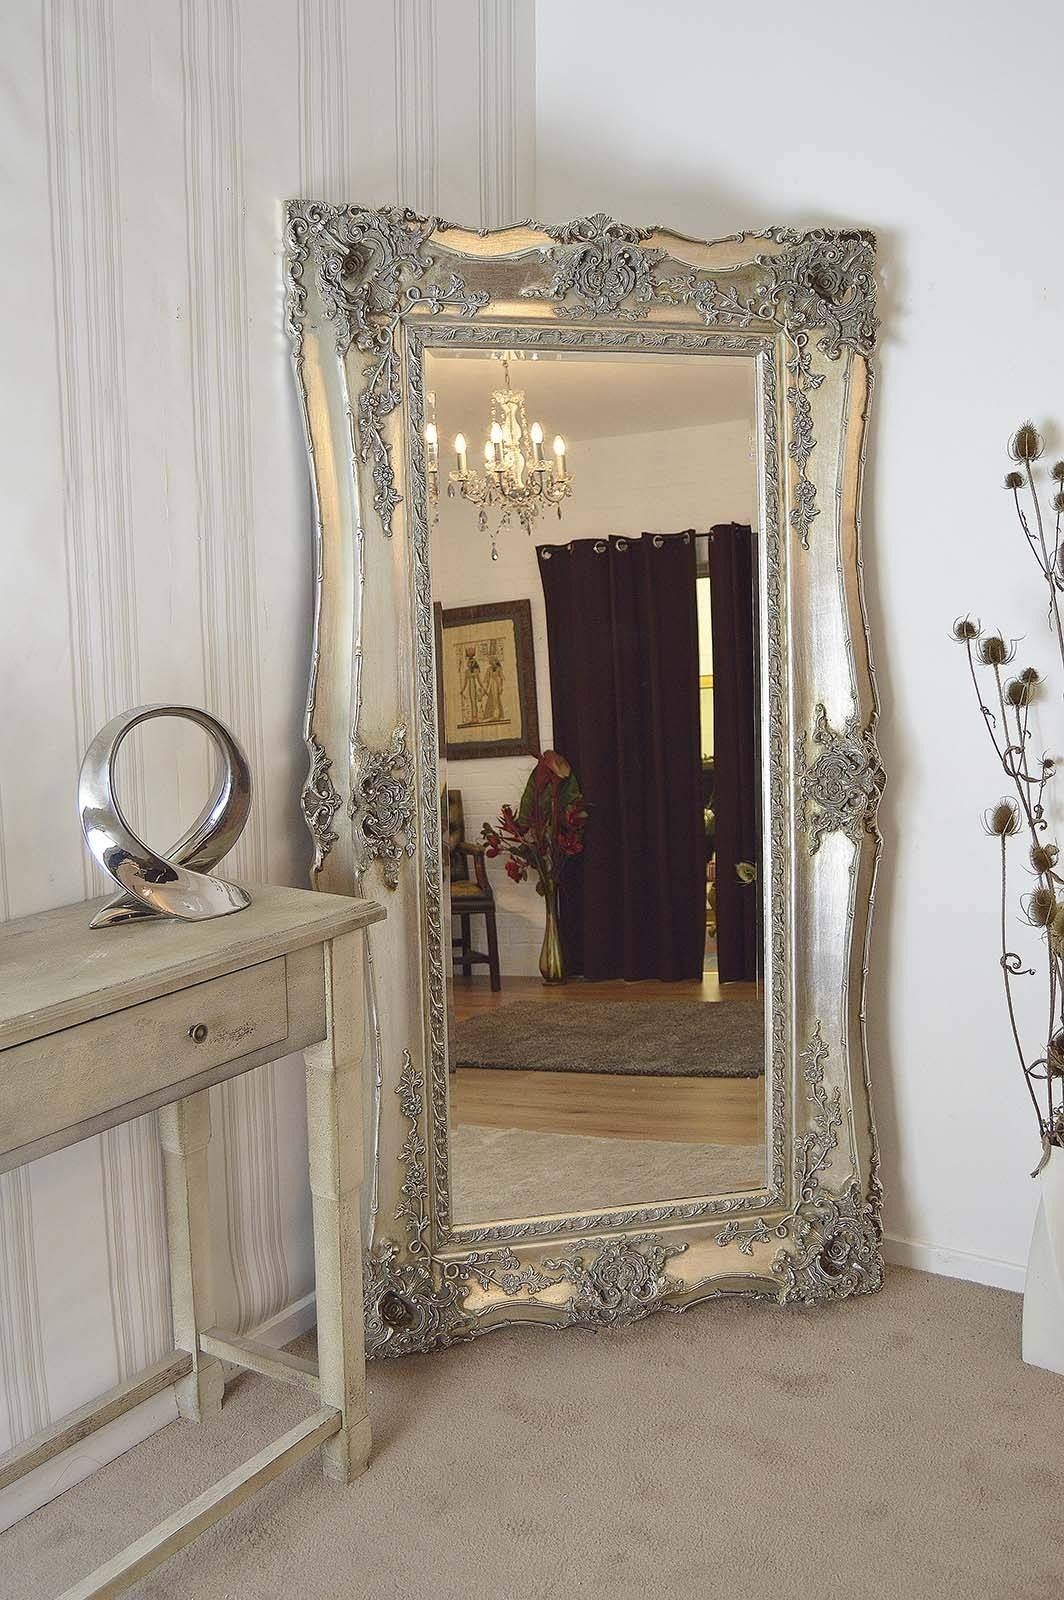 Homeware: Freestanding Tall Mirror | Floor Length Mirrors | Floor With Regard To Tall Ornate Mirrors (View 10 of 15)